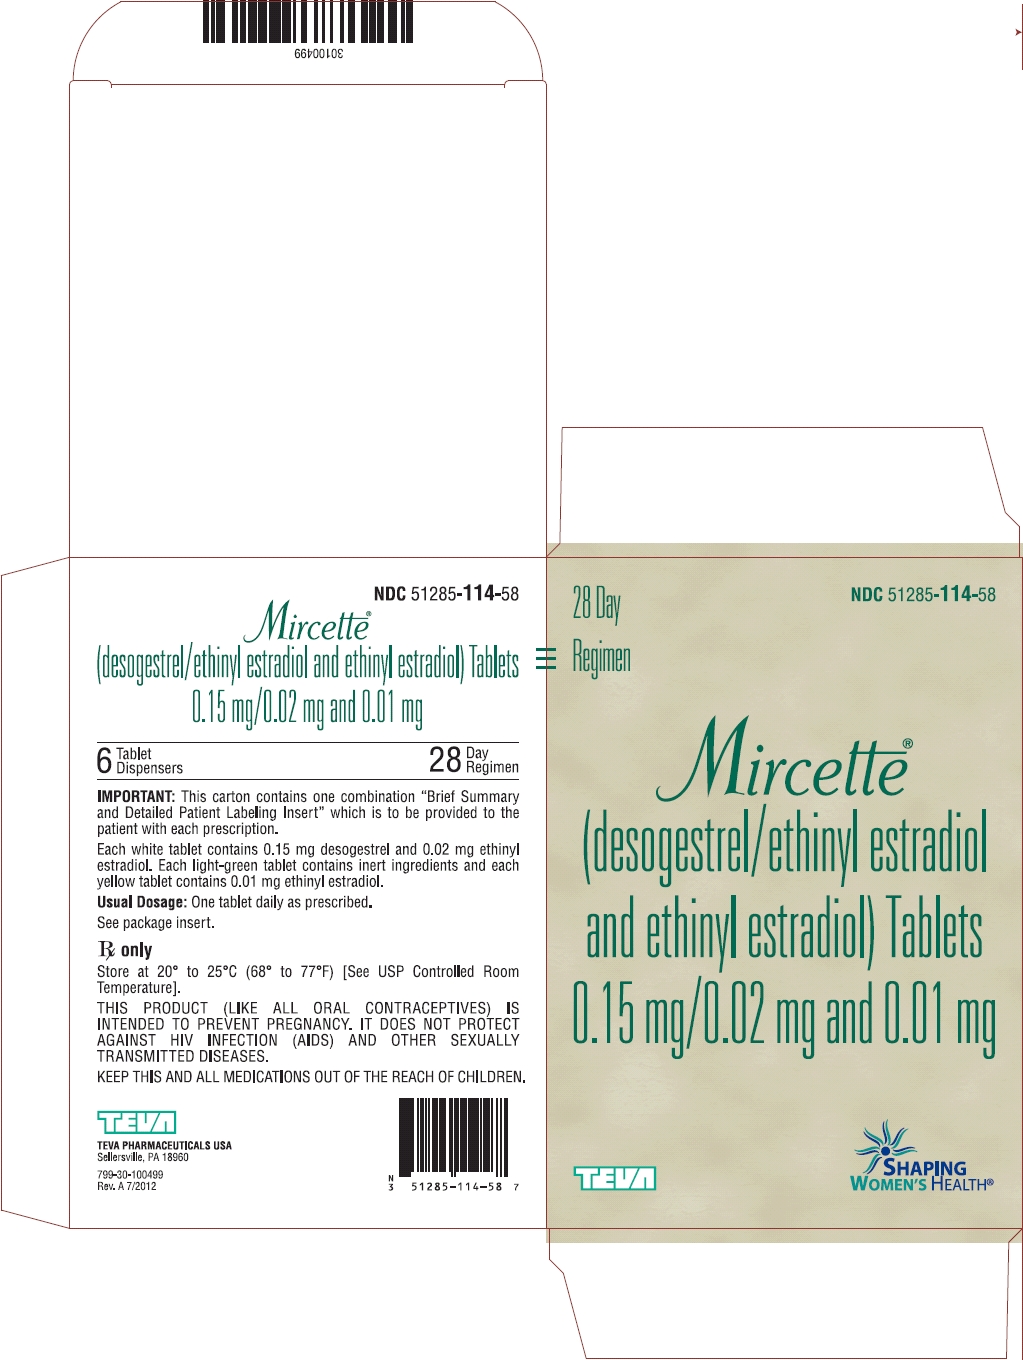 Mircette® Tablets 0.15 mg/0.02 mg and 0.01 mg, 6 Dispenser Carton, Part 1 of 2